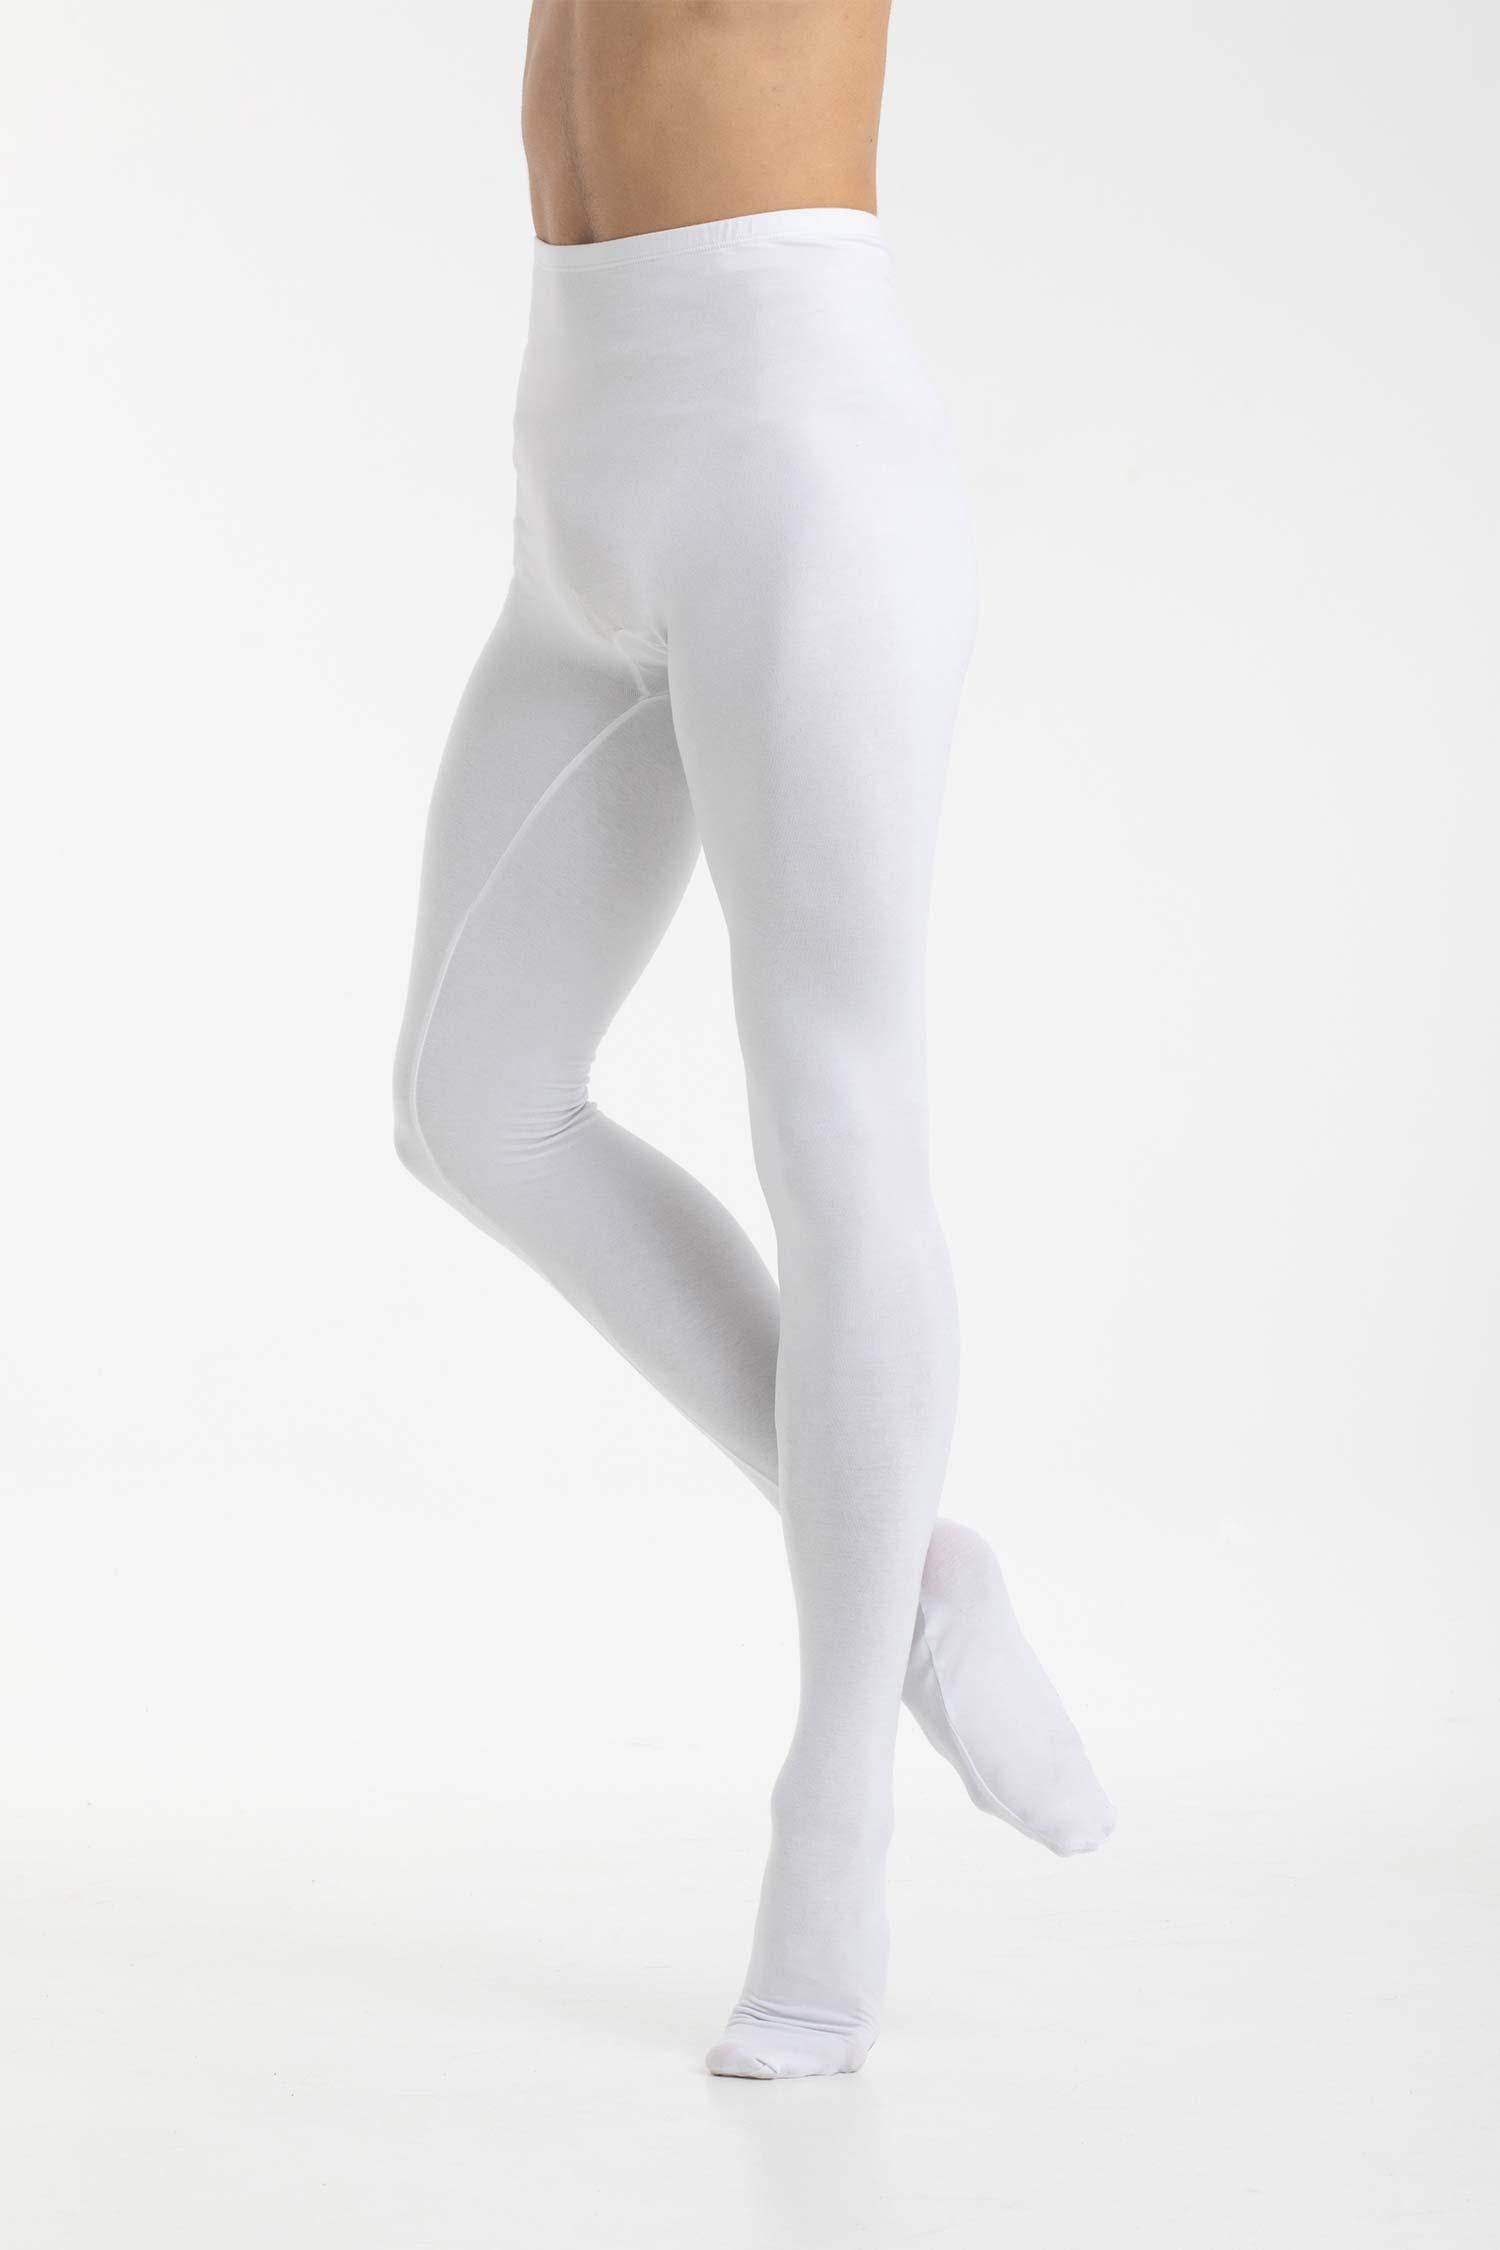 Mens Cotton Dance Tights (SO116) – Darcy Clothing